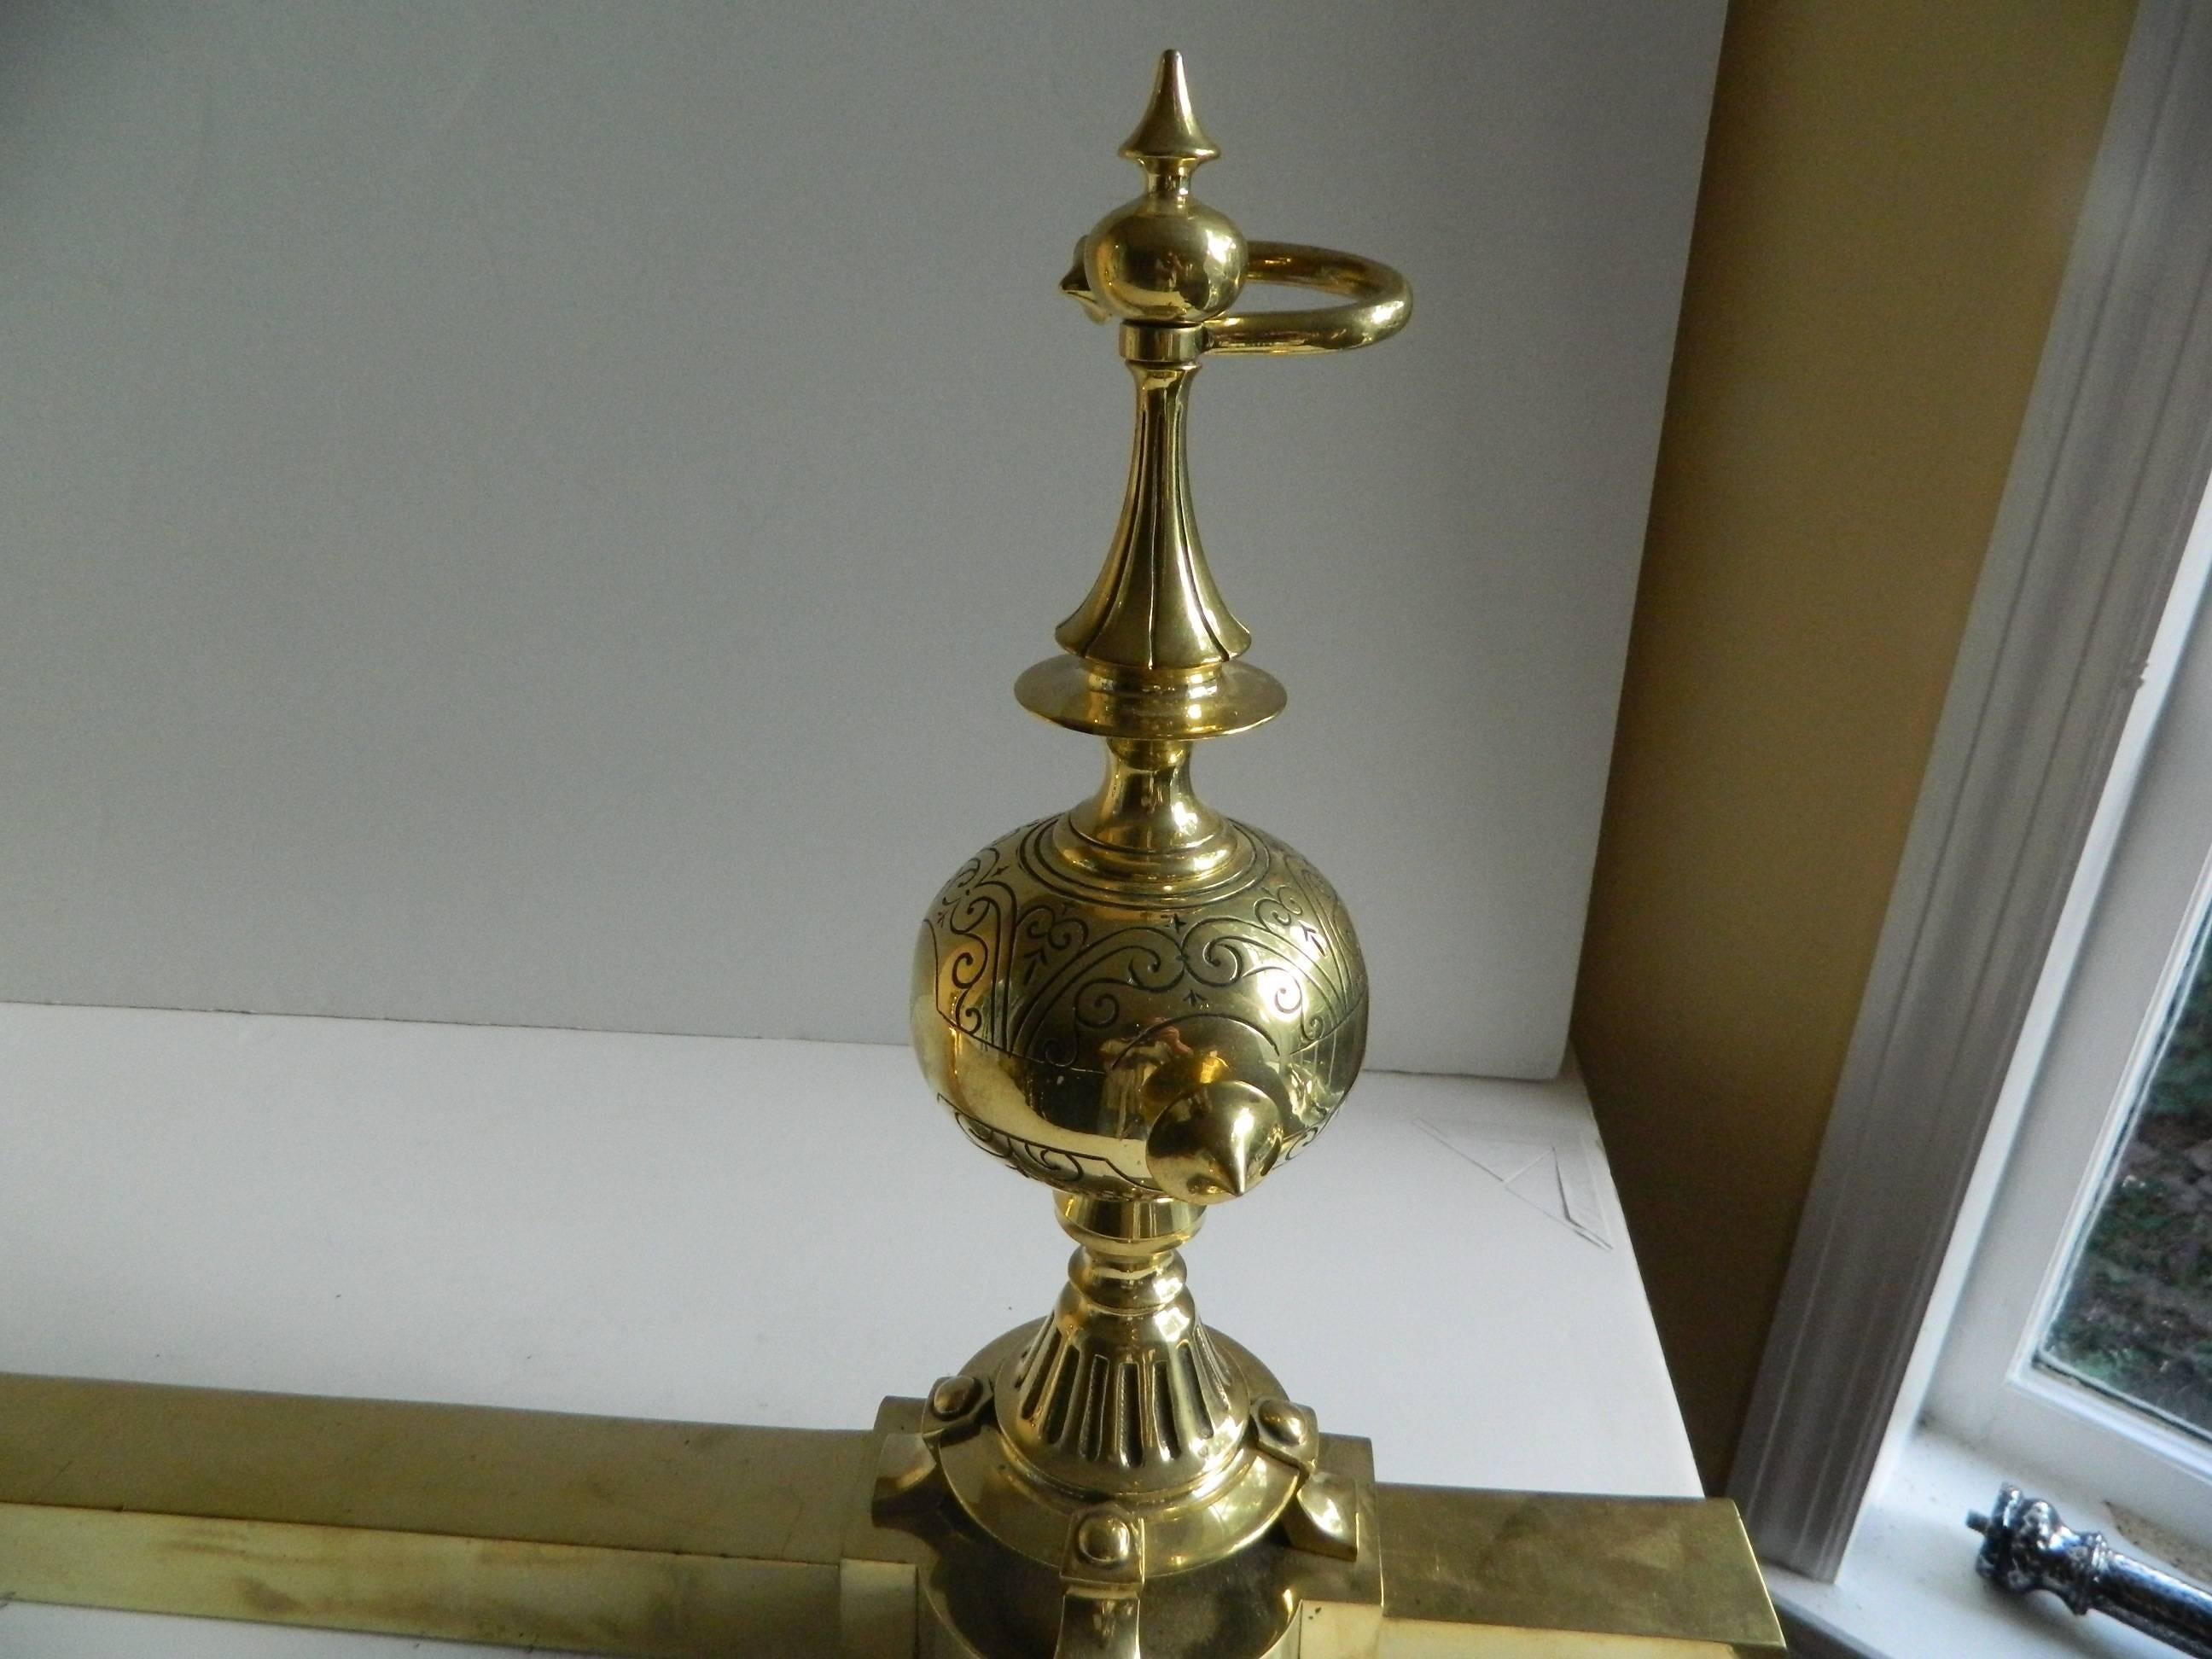 French Pair of Polished Brass Chenets or Andirons with a Fender, 19th Century